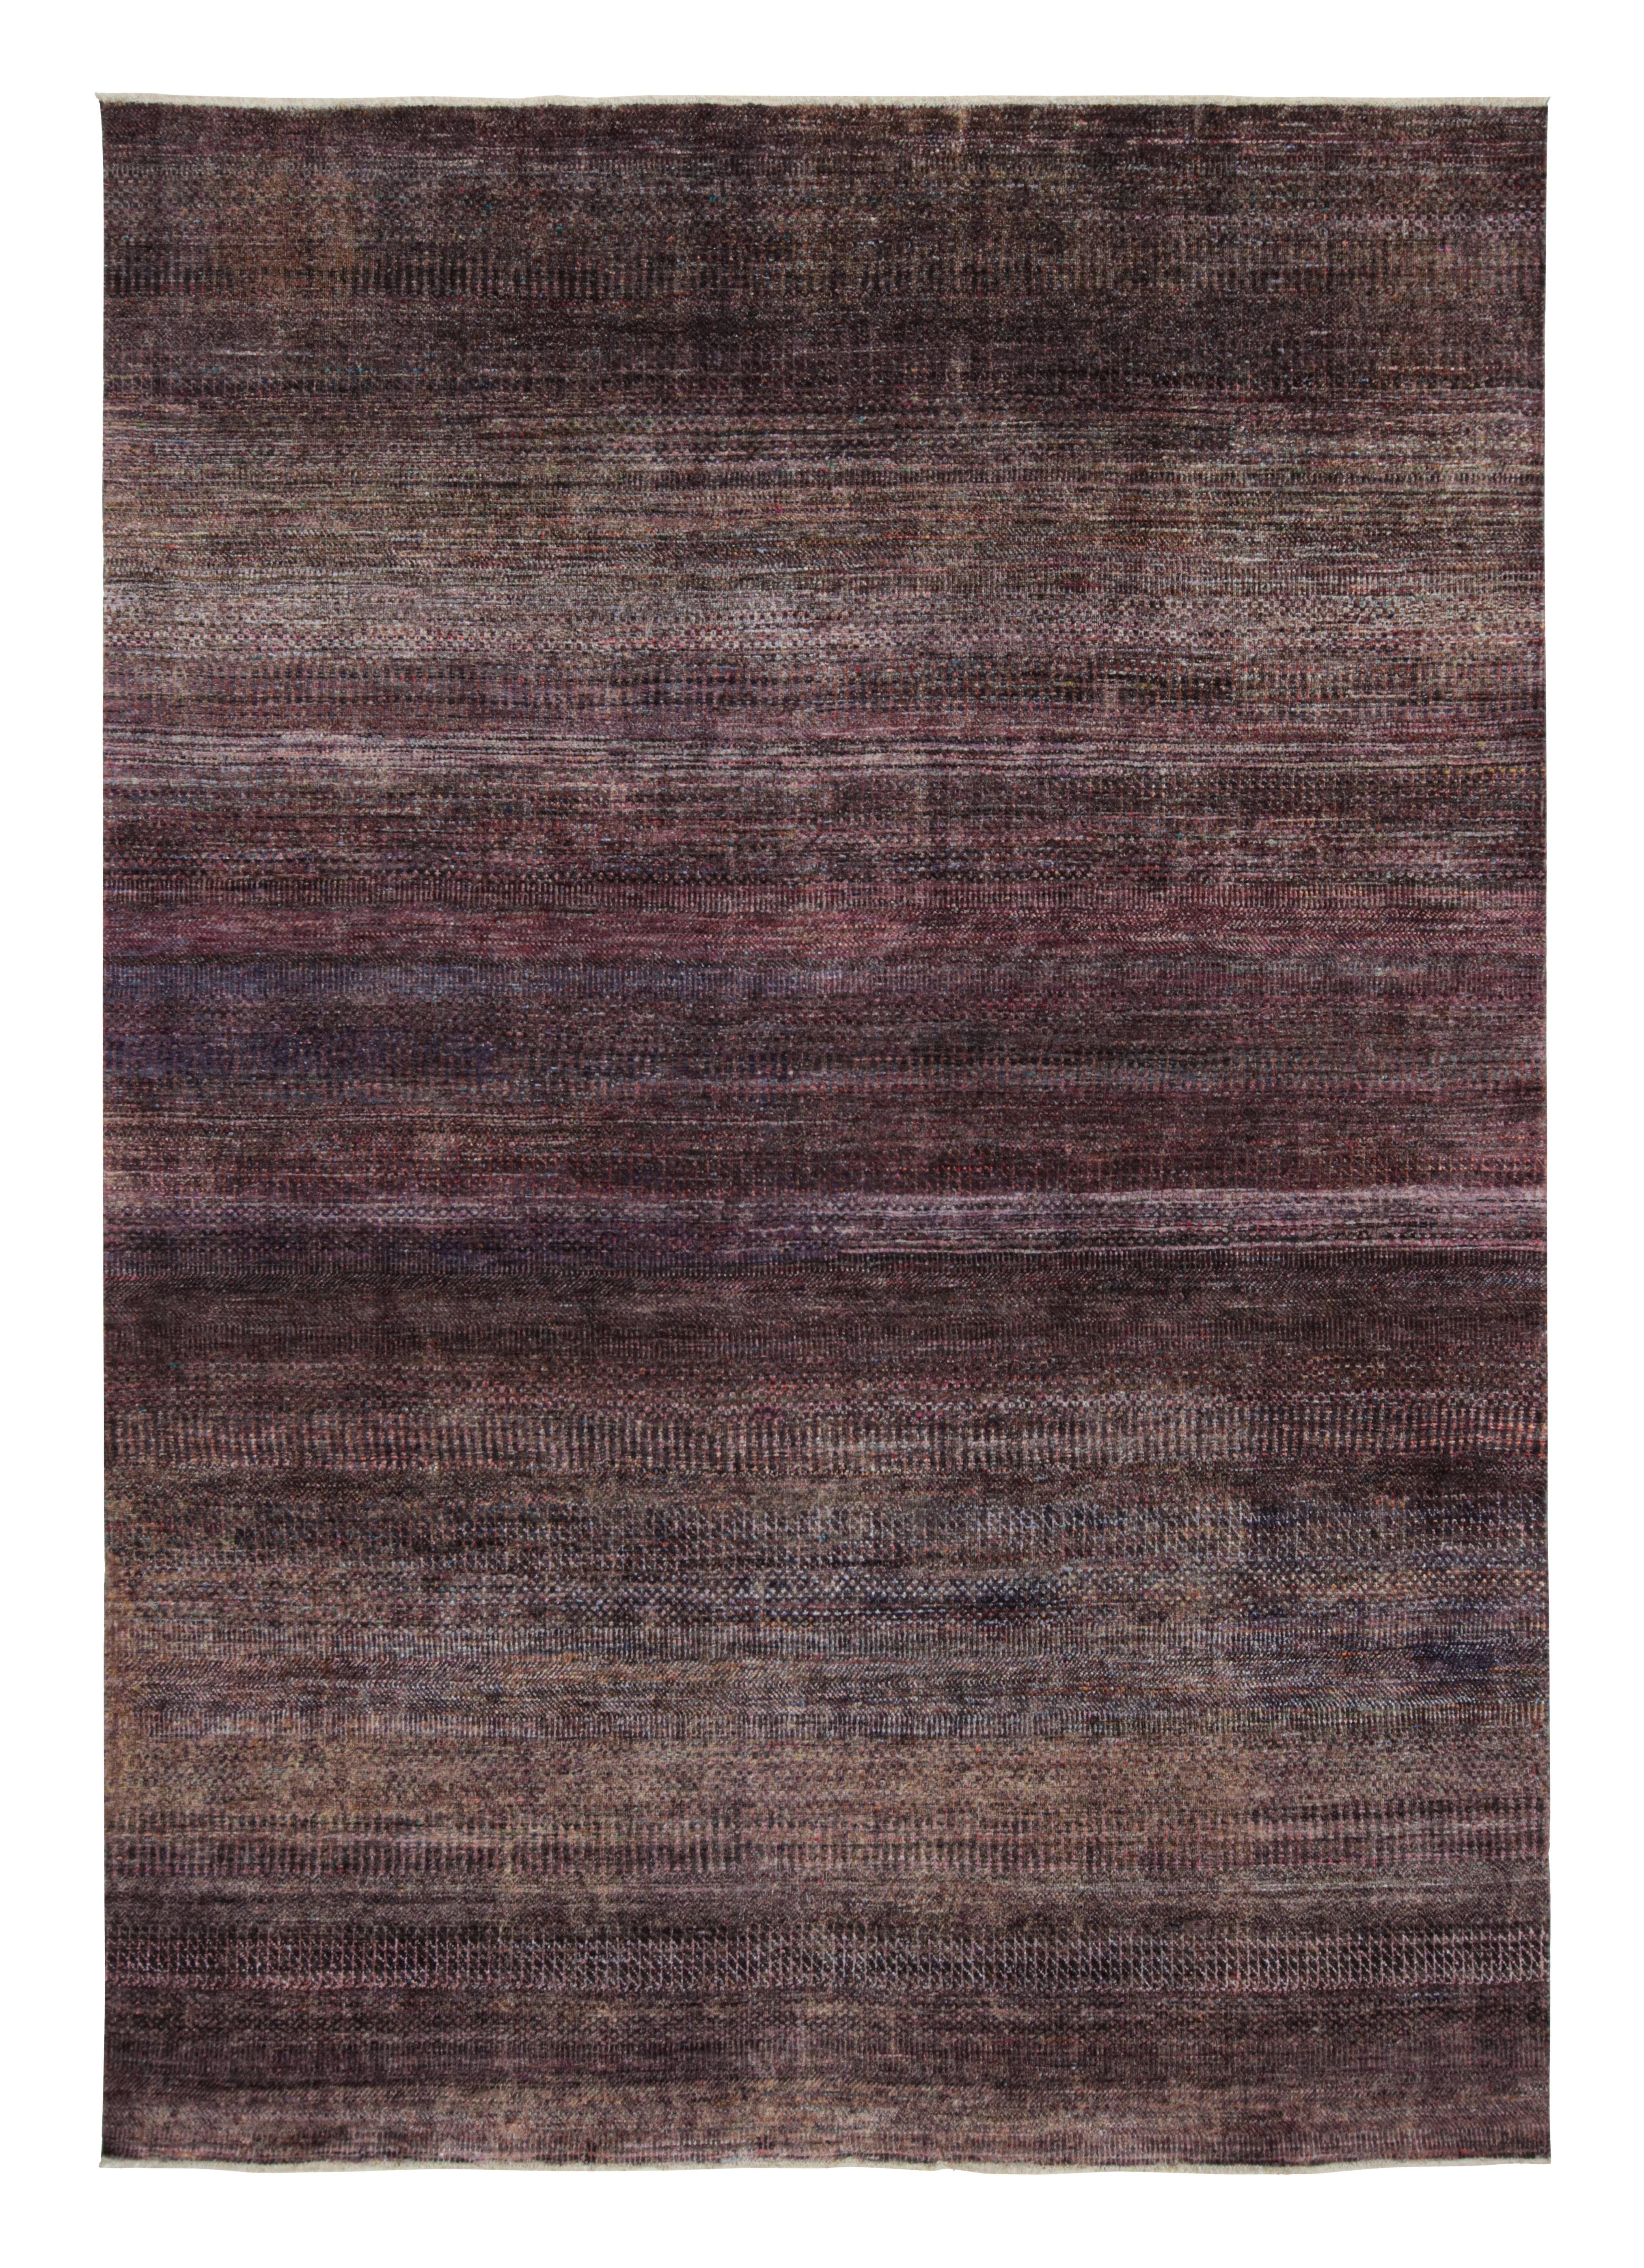 This 9x12 rug is a bold new addition to the Texture of Color Collection by Rug & Kilim.

On the Design:

Made with hand-knotted silk, this rug reflects a new take on the theme of this collection—particularly a vegetable dye like those used in